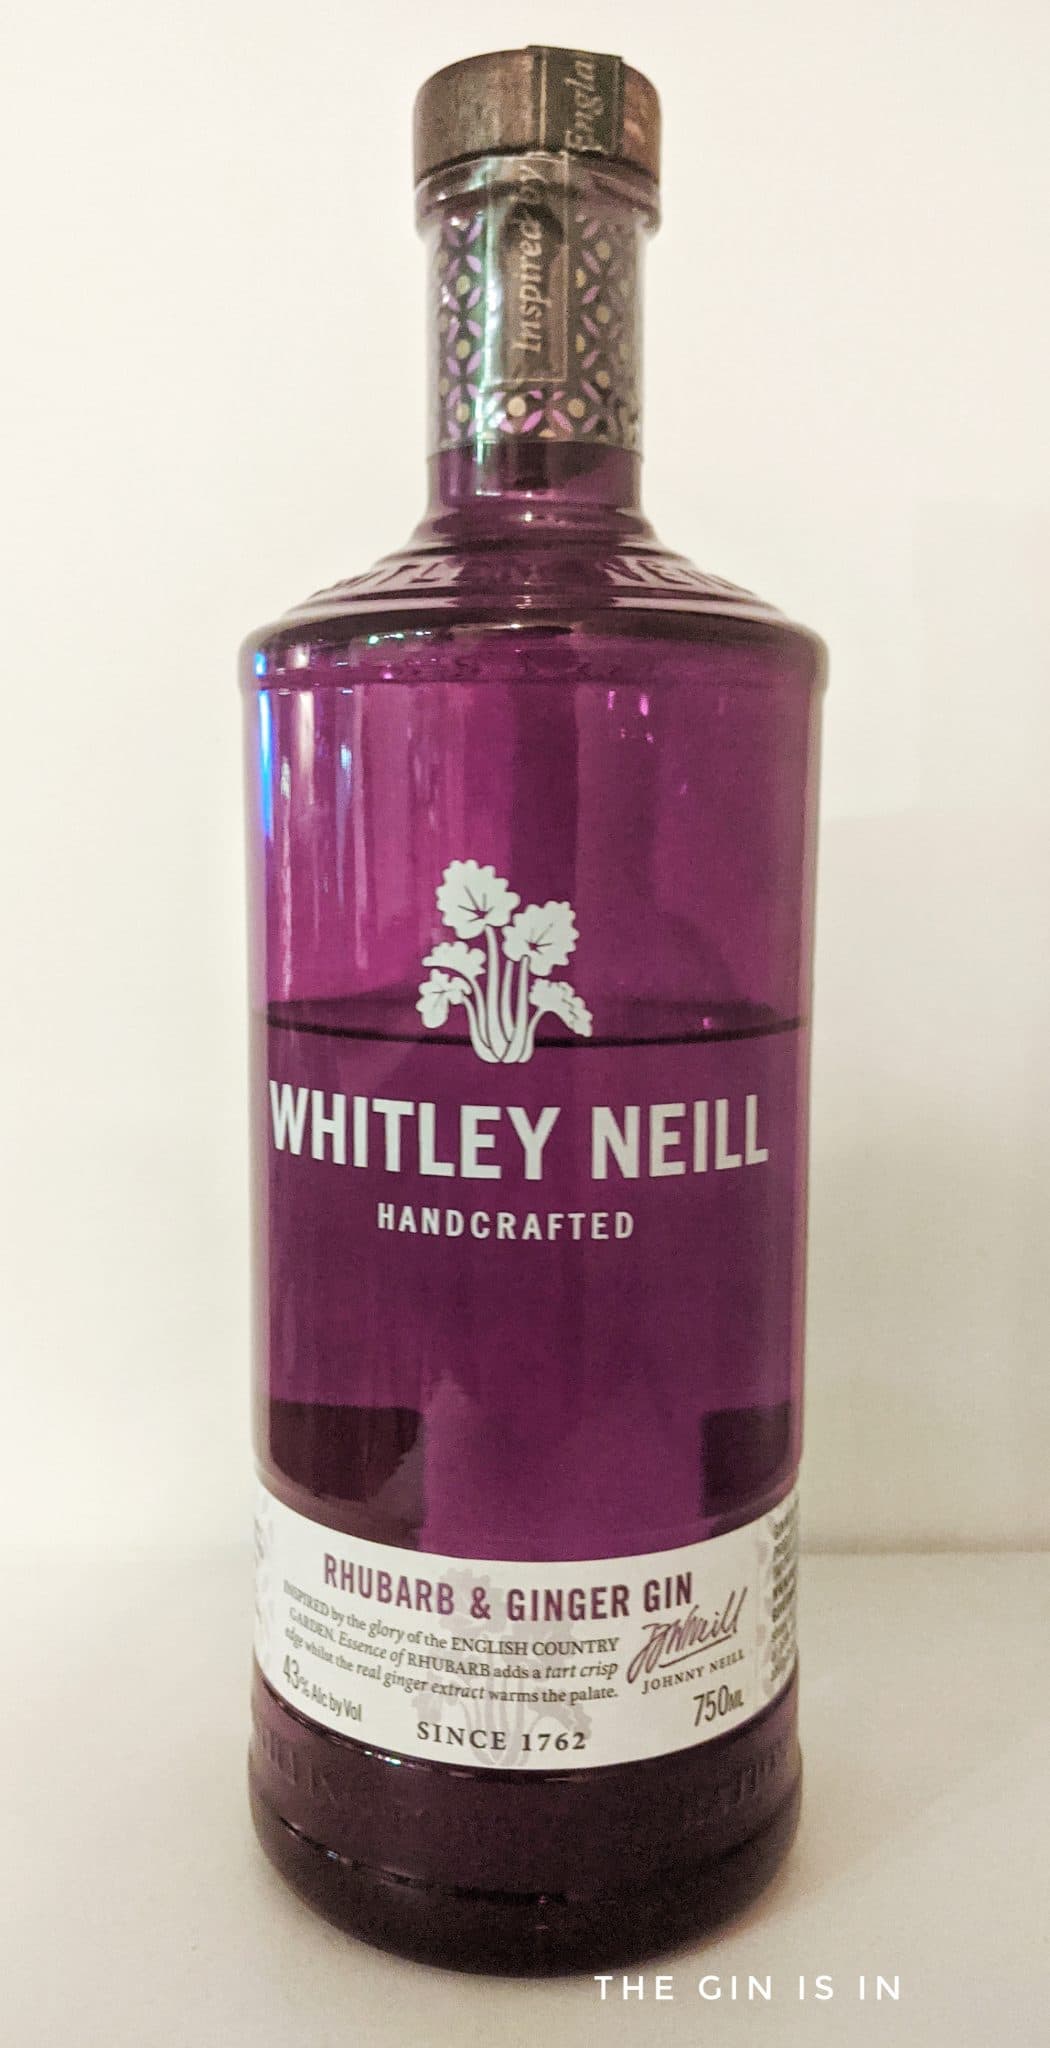 Whitley Neill Rhubarb and Ginger Gin | Expert Gin Review and Tasting Notes